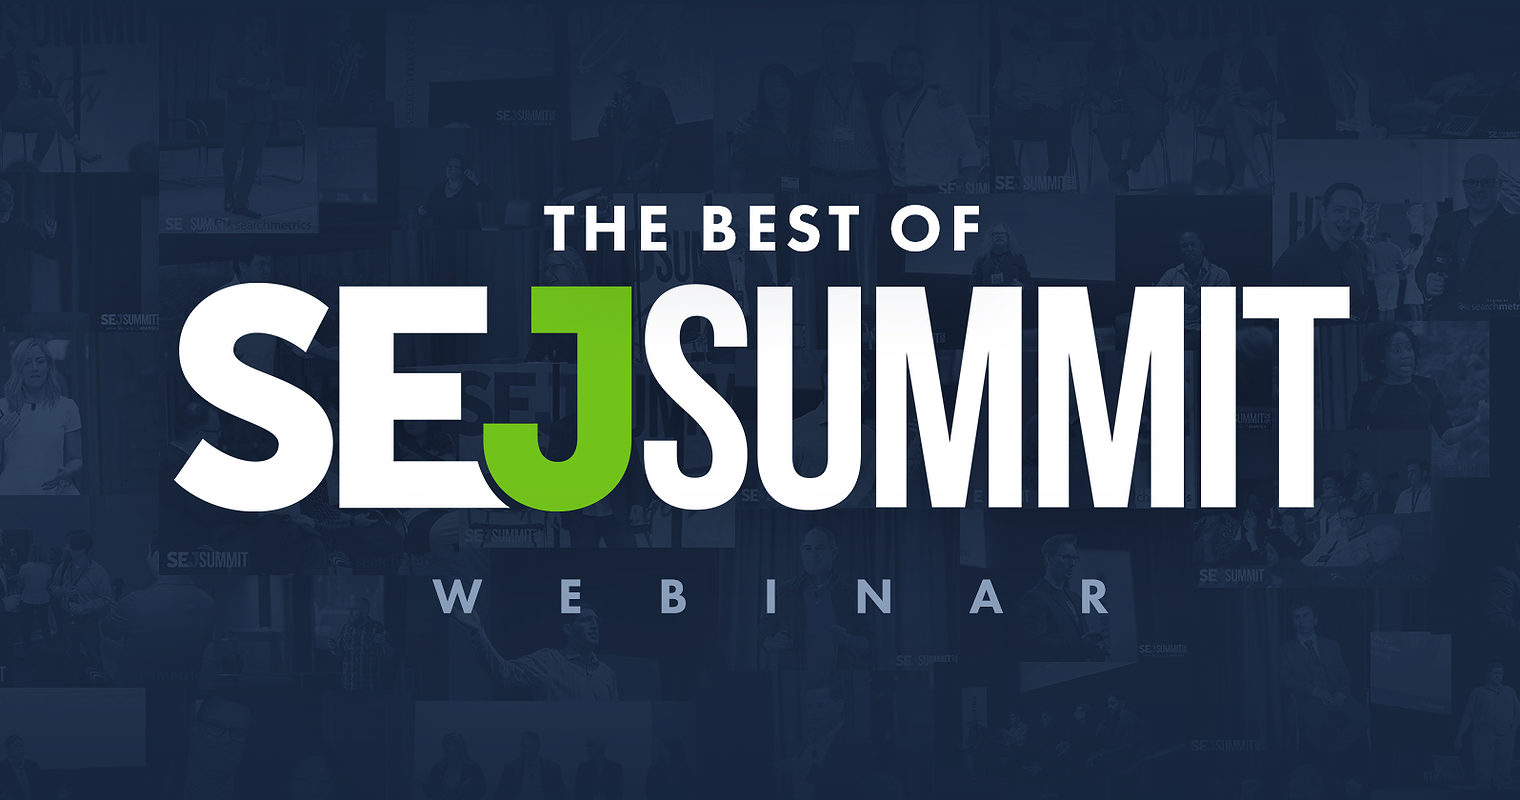 Introducing BOSS: The Best of SEJ Summit